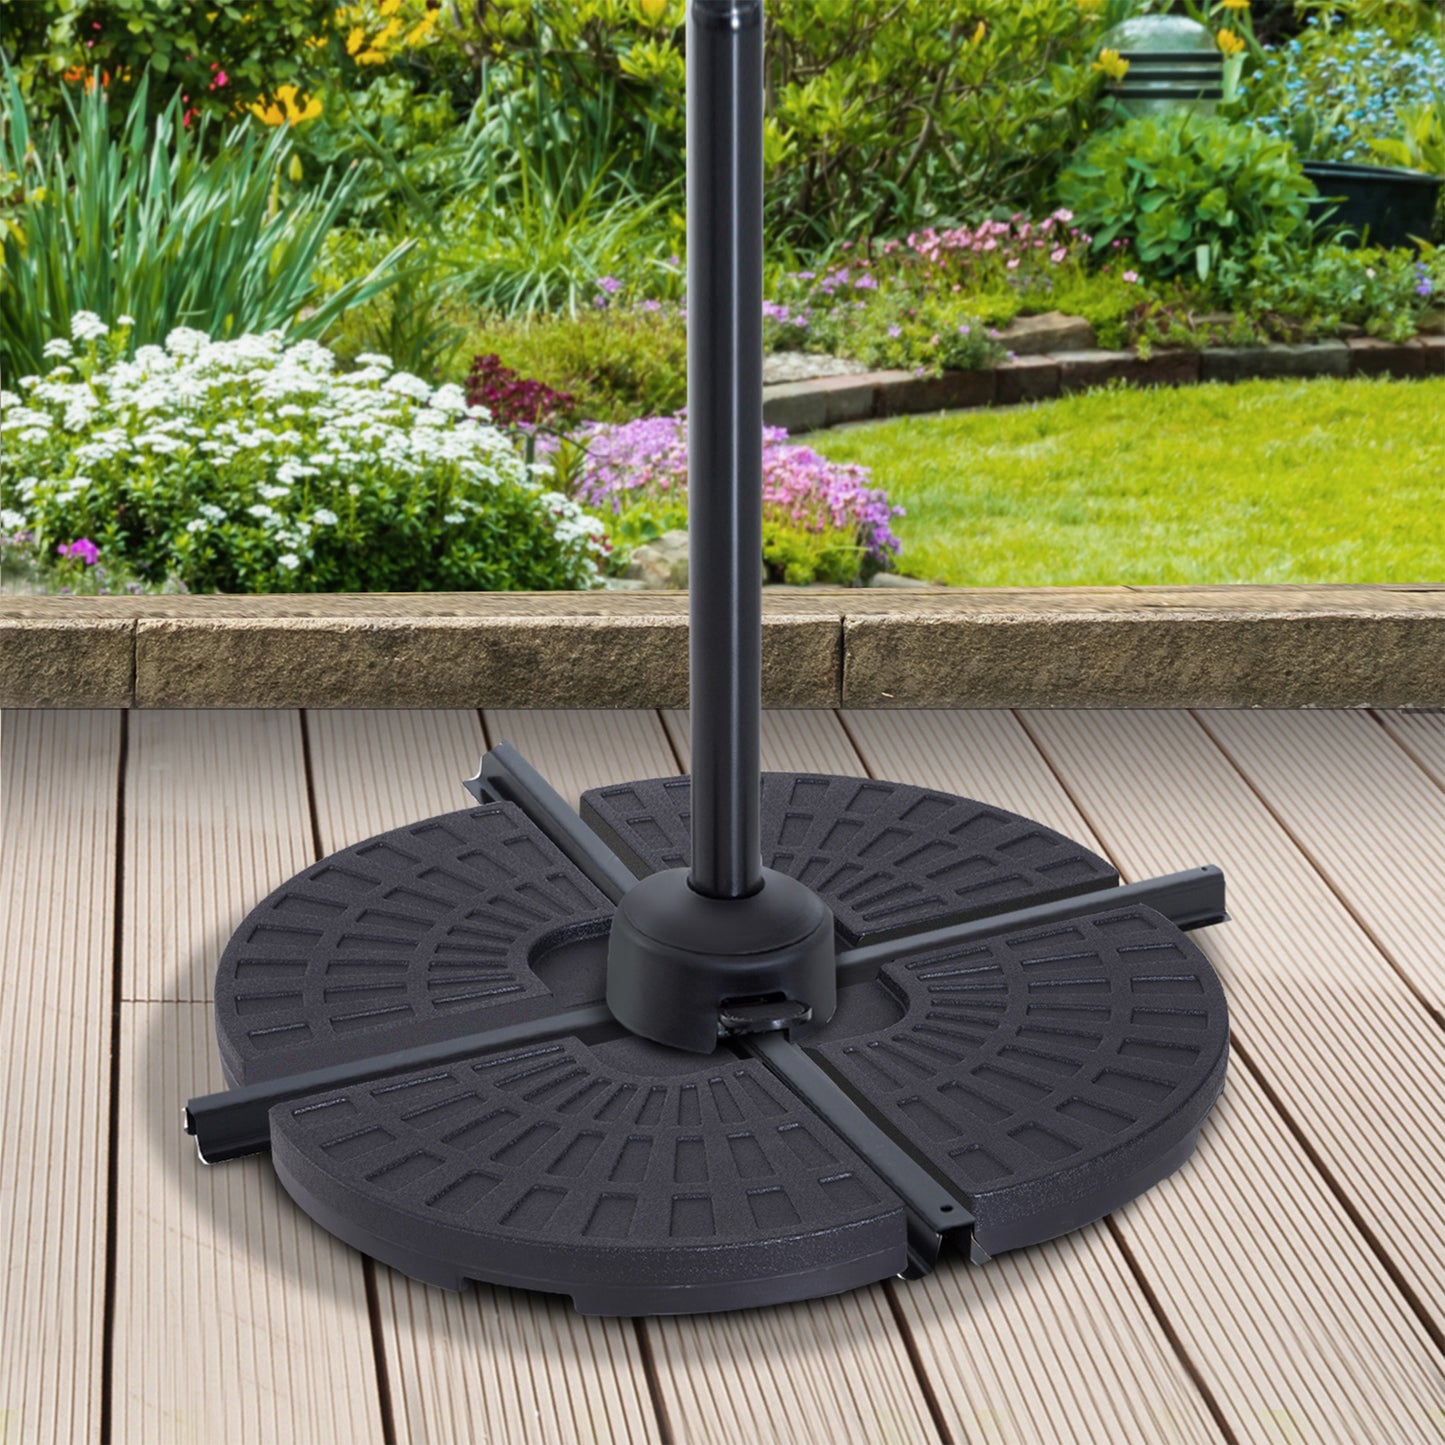 Outsunny 4 PCs Portable Round Parasol Base Umbrella Cross Stand Weights Holder Sand or Water Filled Outdoor Garden Patio